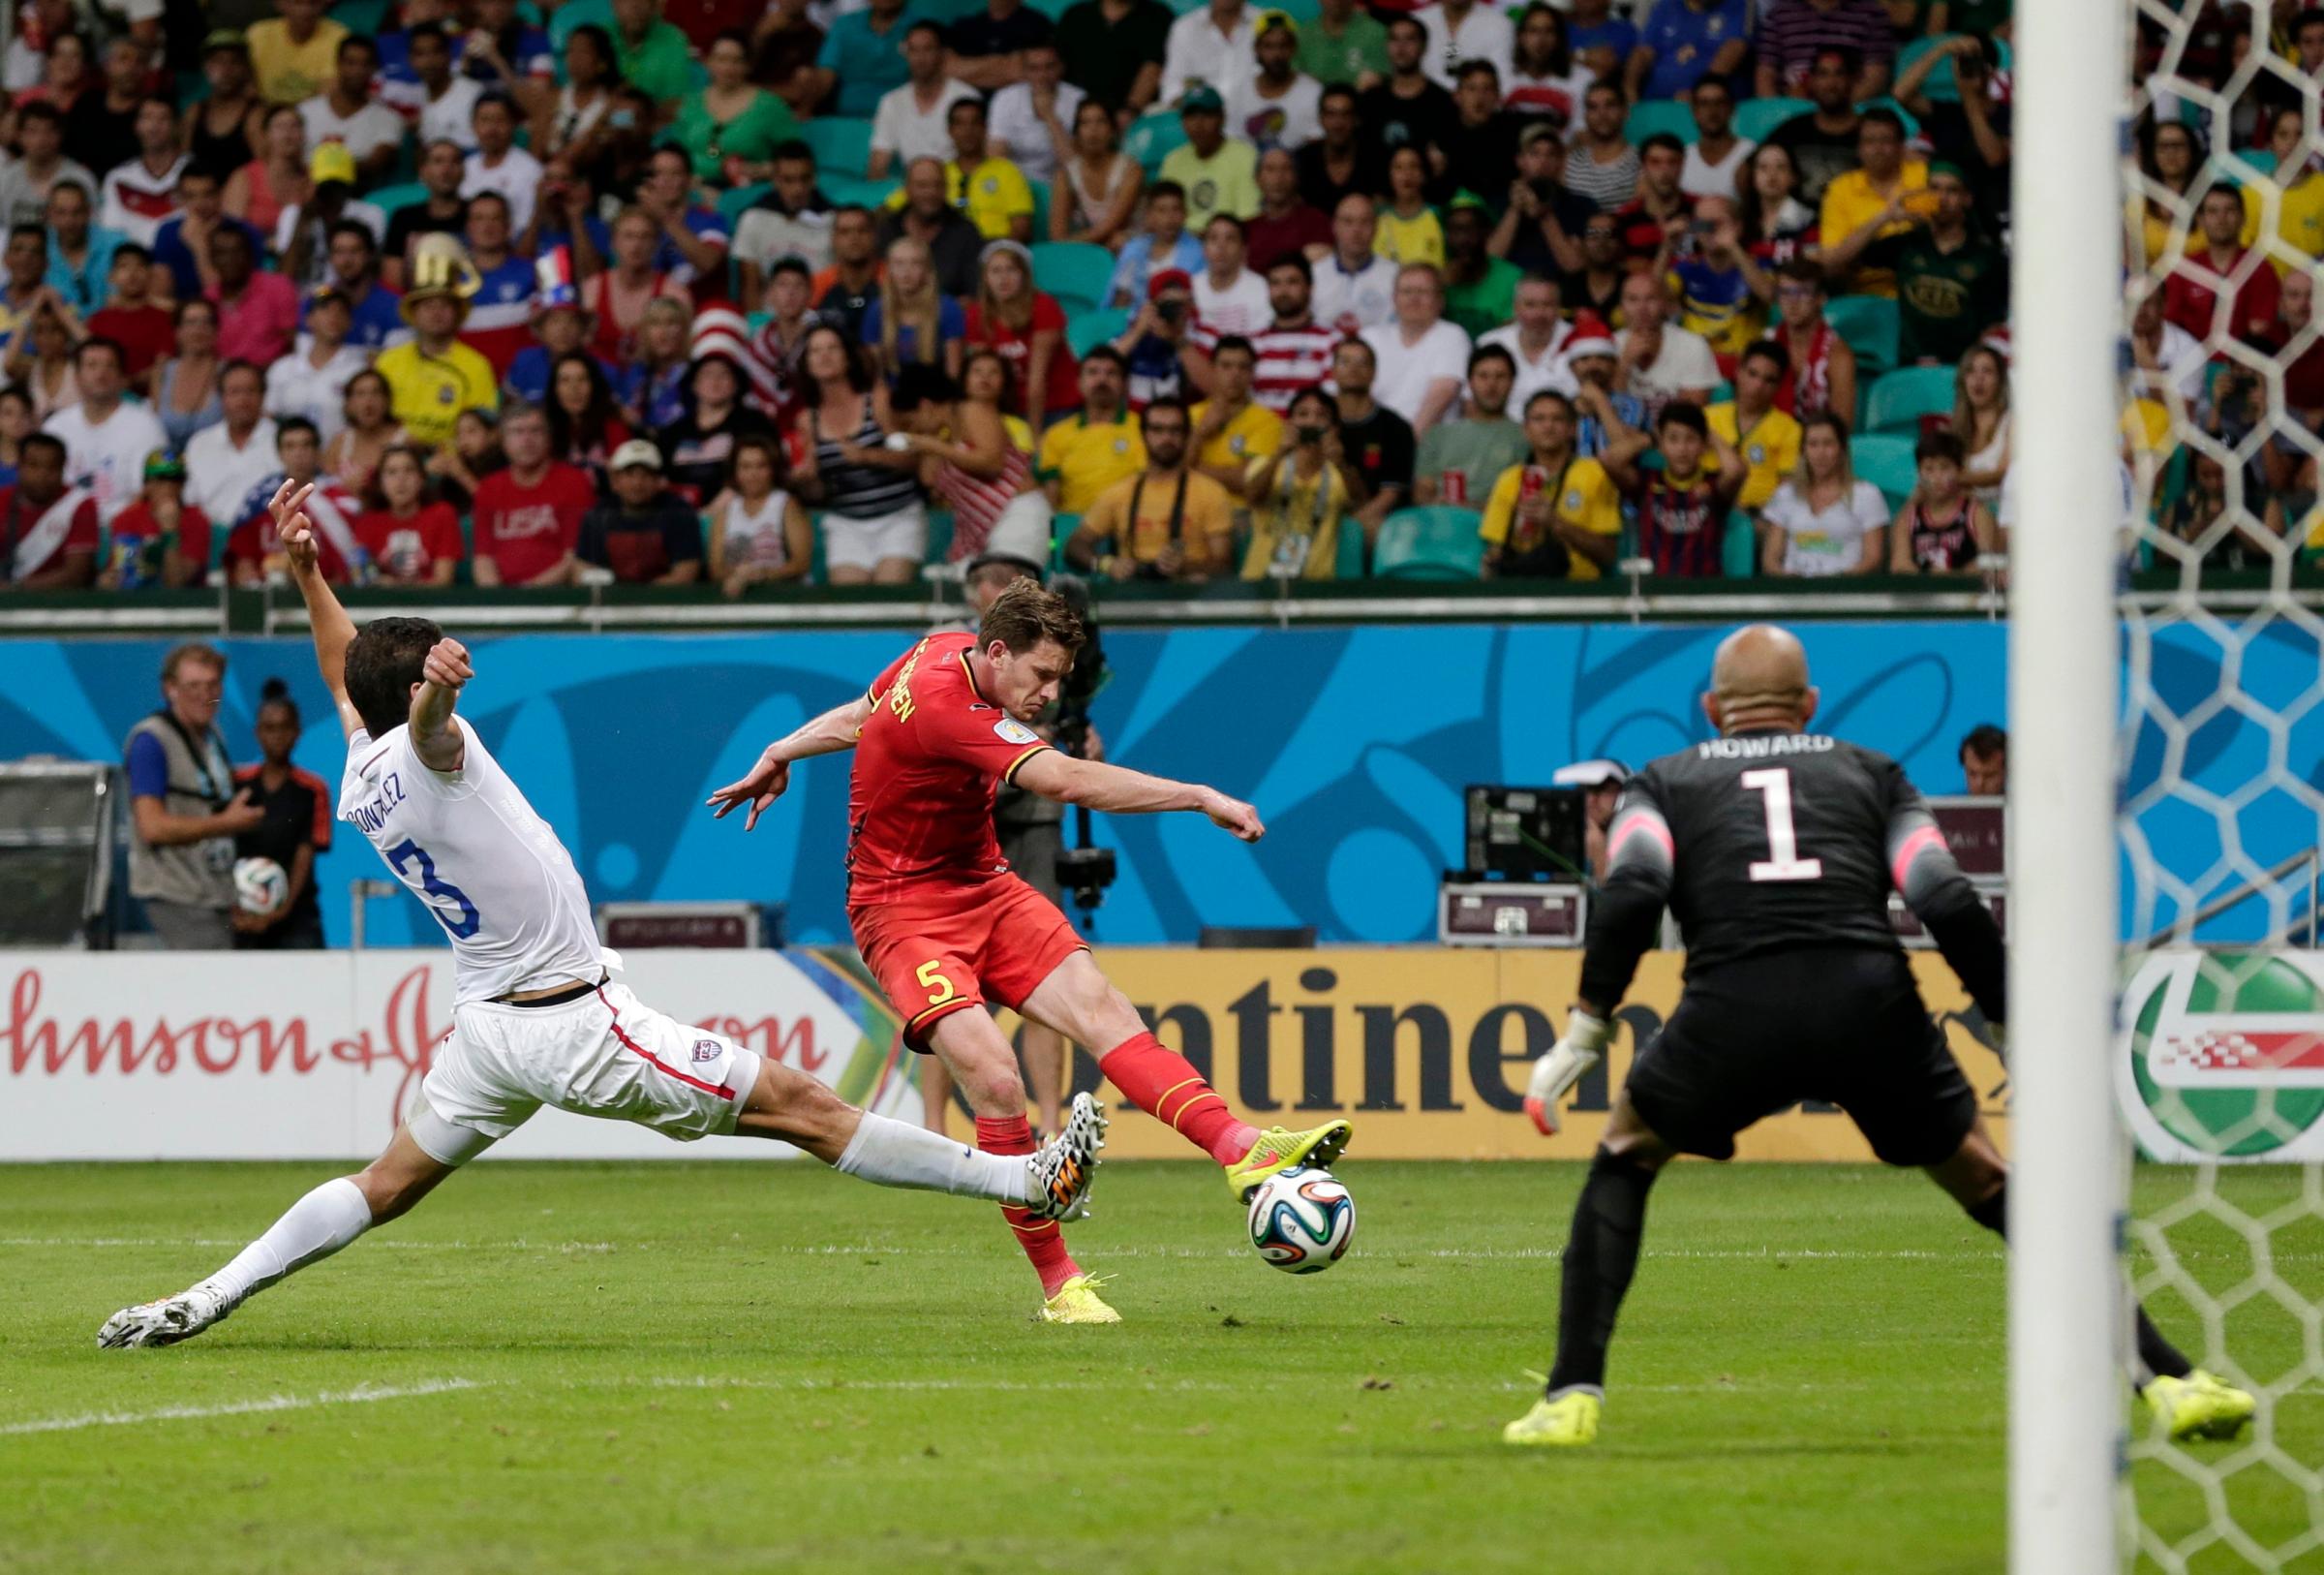 United States' Omar Gonzalez (3) tries to defend as Belgium's Jan Vertonghen gets a shot on United States' goalkeeper Tim Howard during the World Cup round of 16 soccer match between Belgium and the USA at the Arena Fonte Nova in Salvador, Brazil, Tuesday, July 1, 2014.